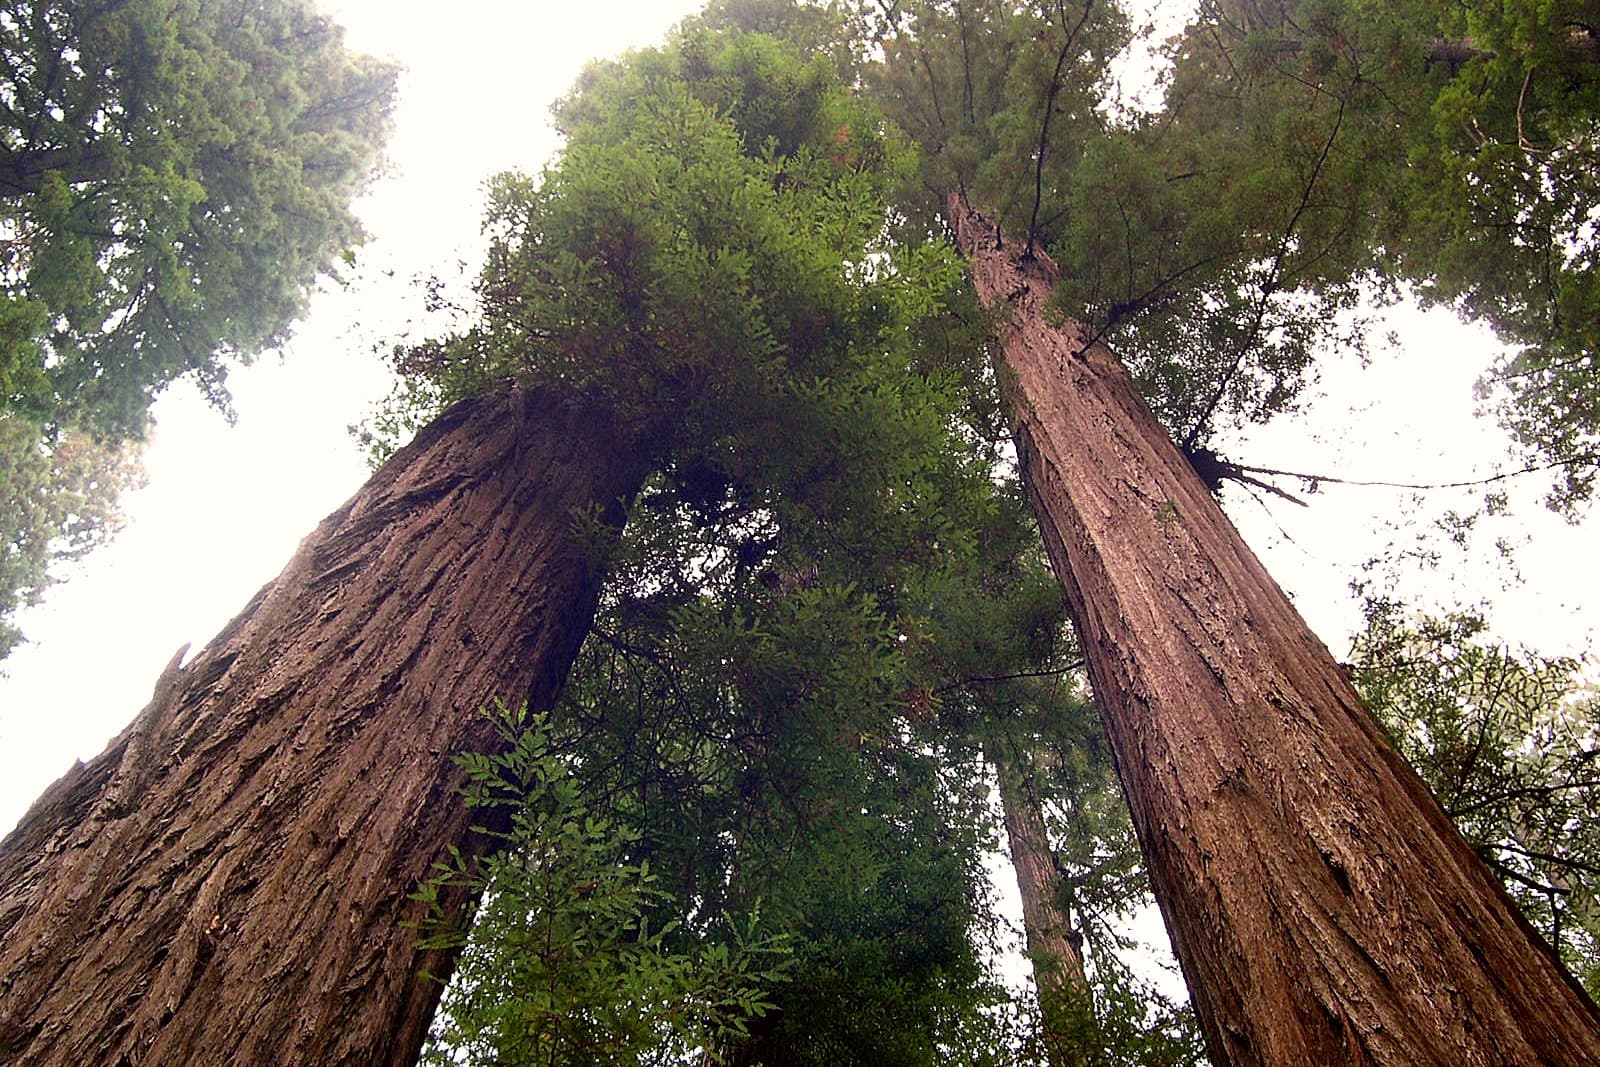 Hyperion: The tallest tree in the world is out of reach of people